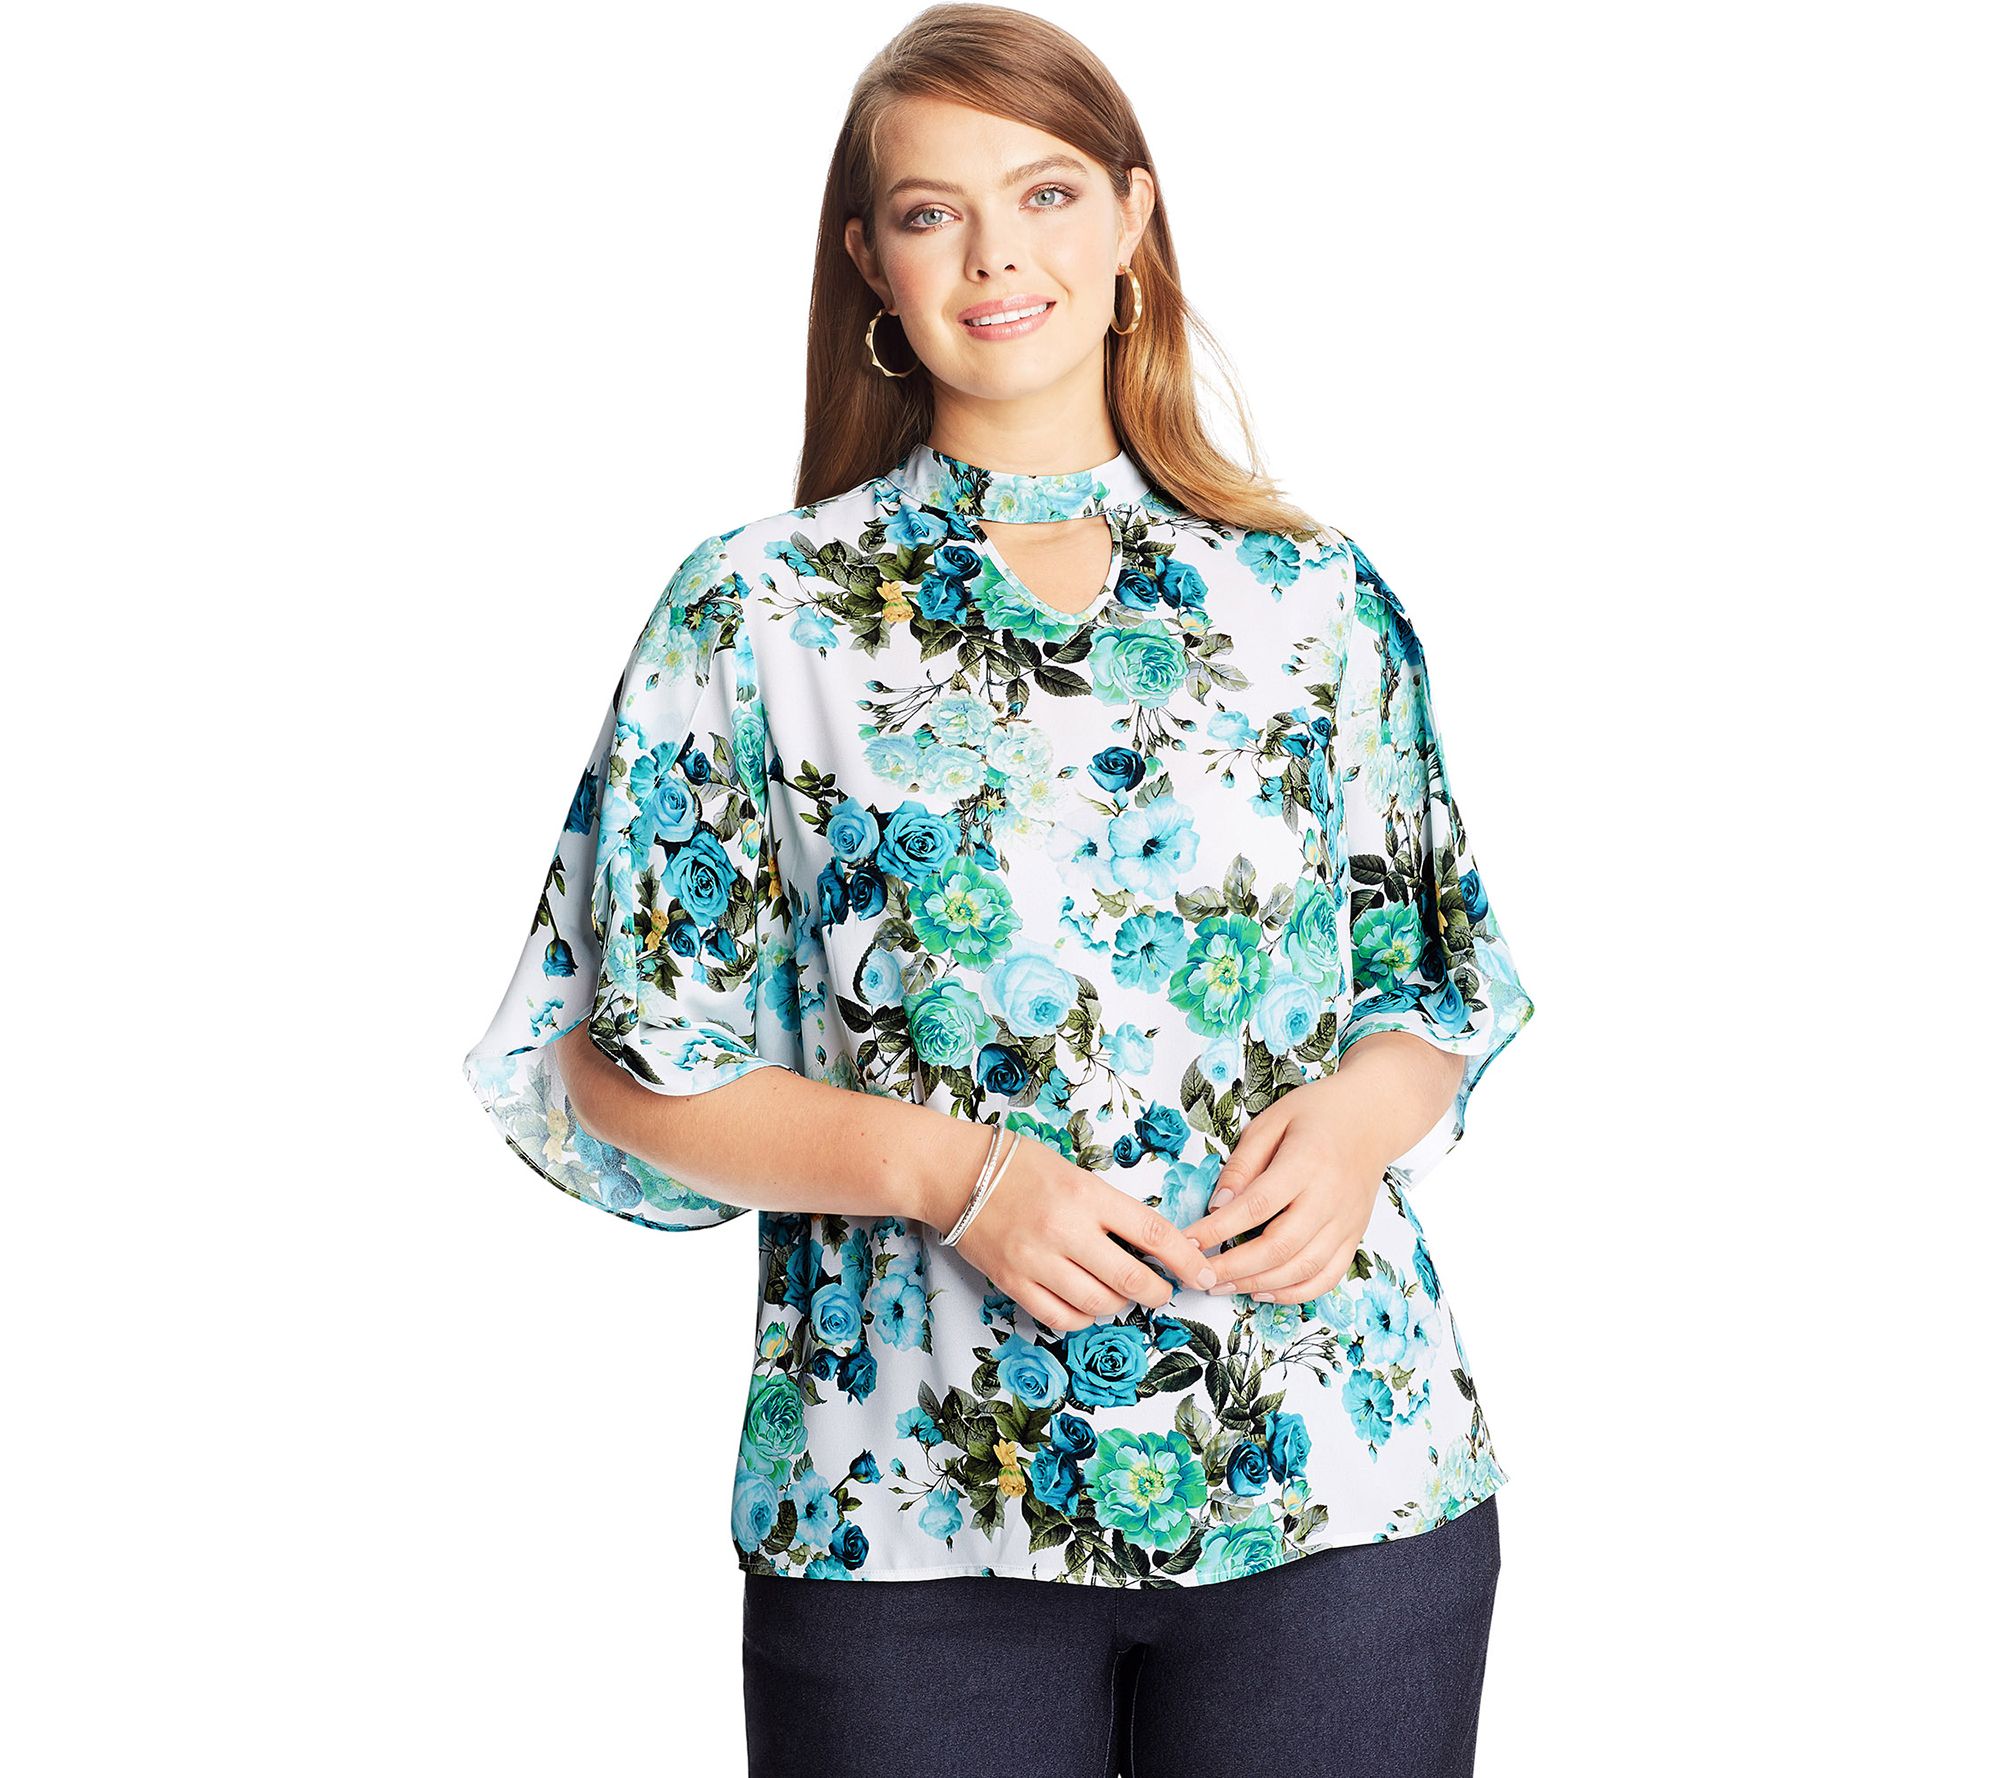 Just My Size Women's Plus Floral Tulip Sleeve Top - QVC.com